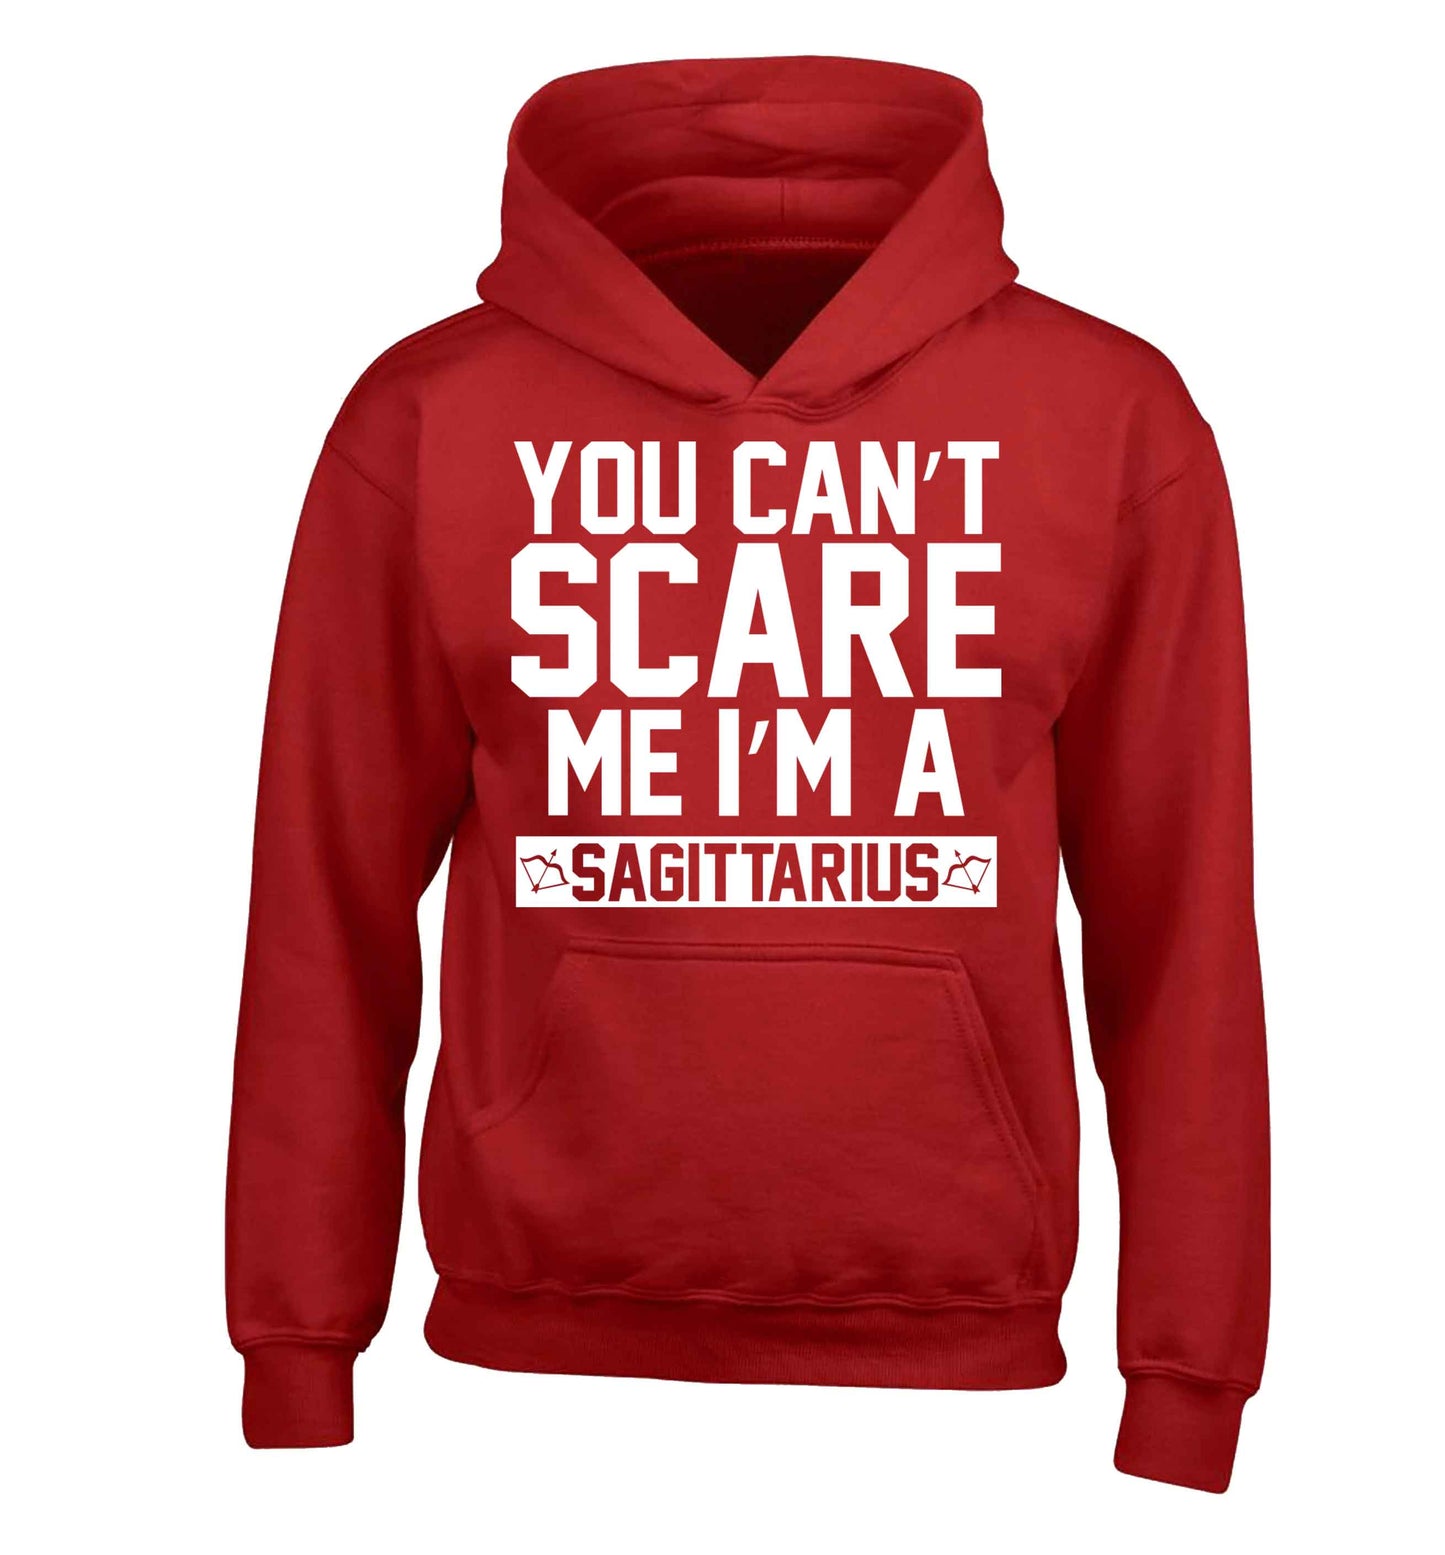 You can't scare me I'm a sagittarius children's red hoodie 12-13 Years